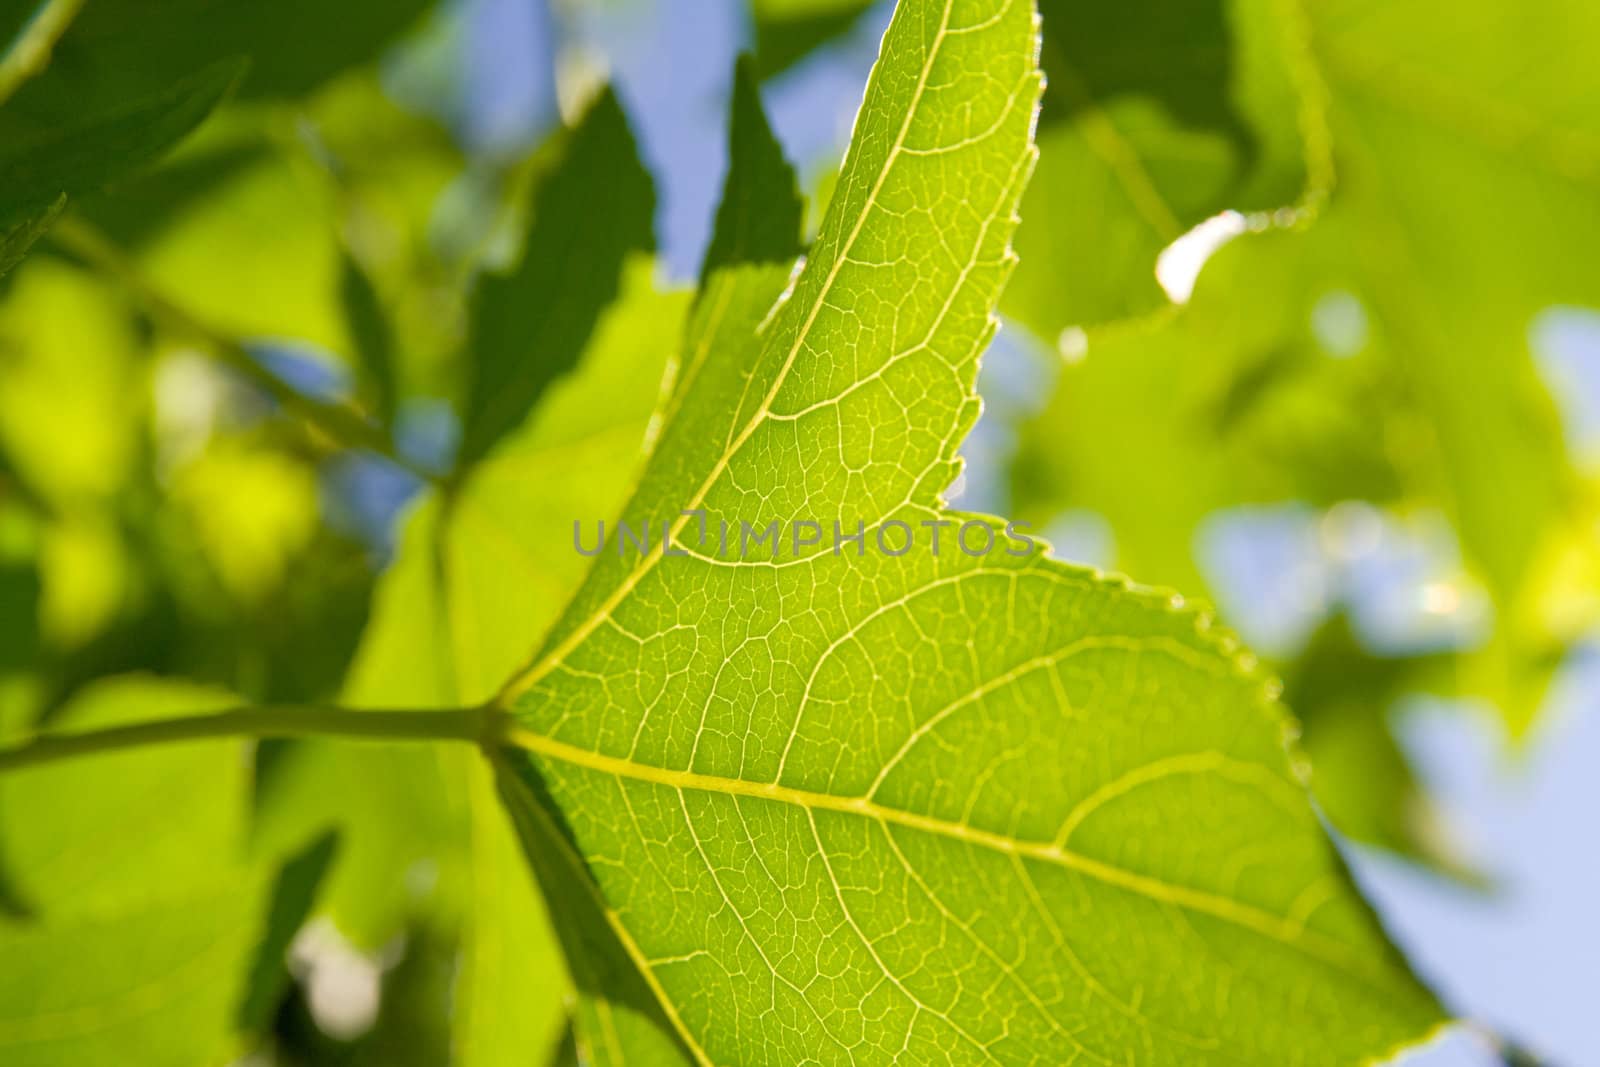 Background image of multiple leaves with veins.